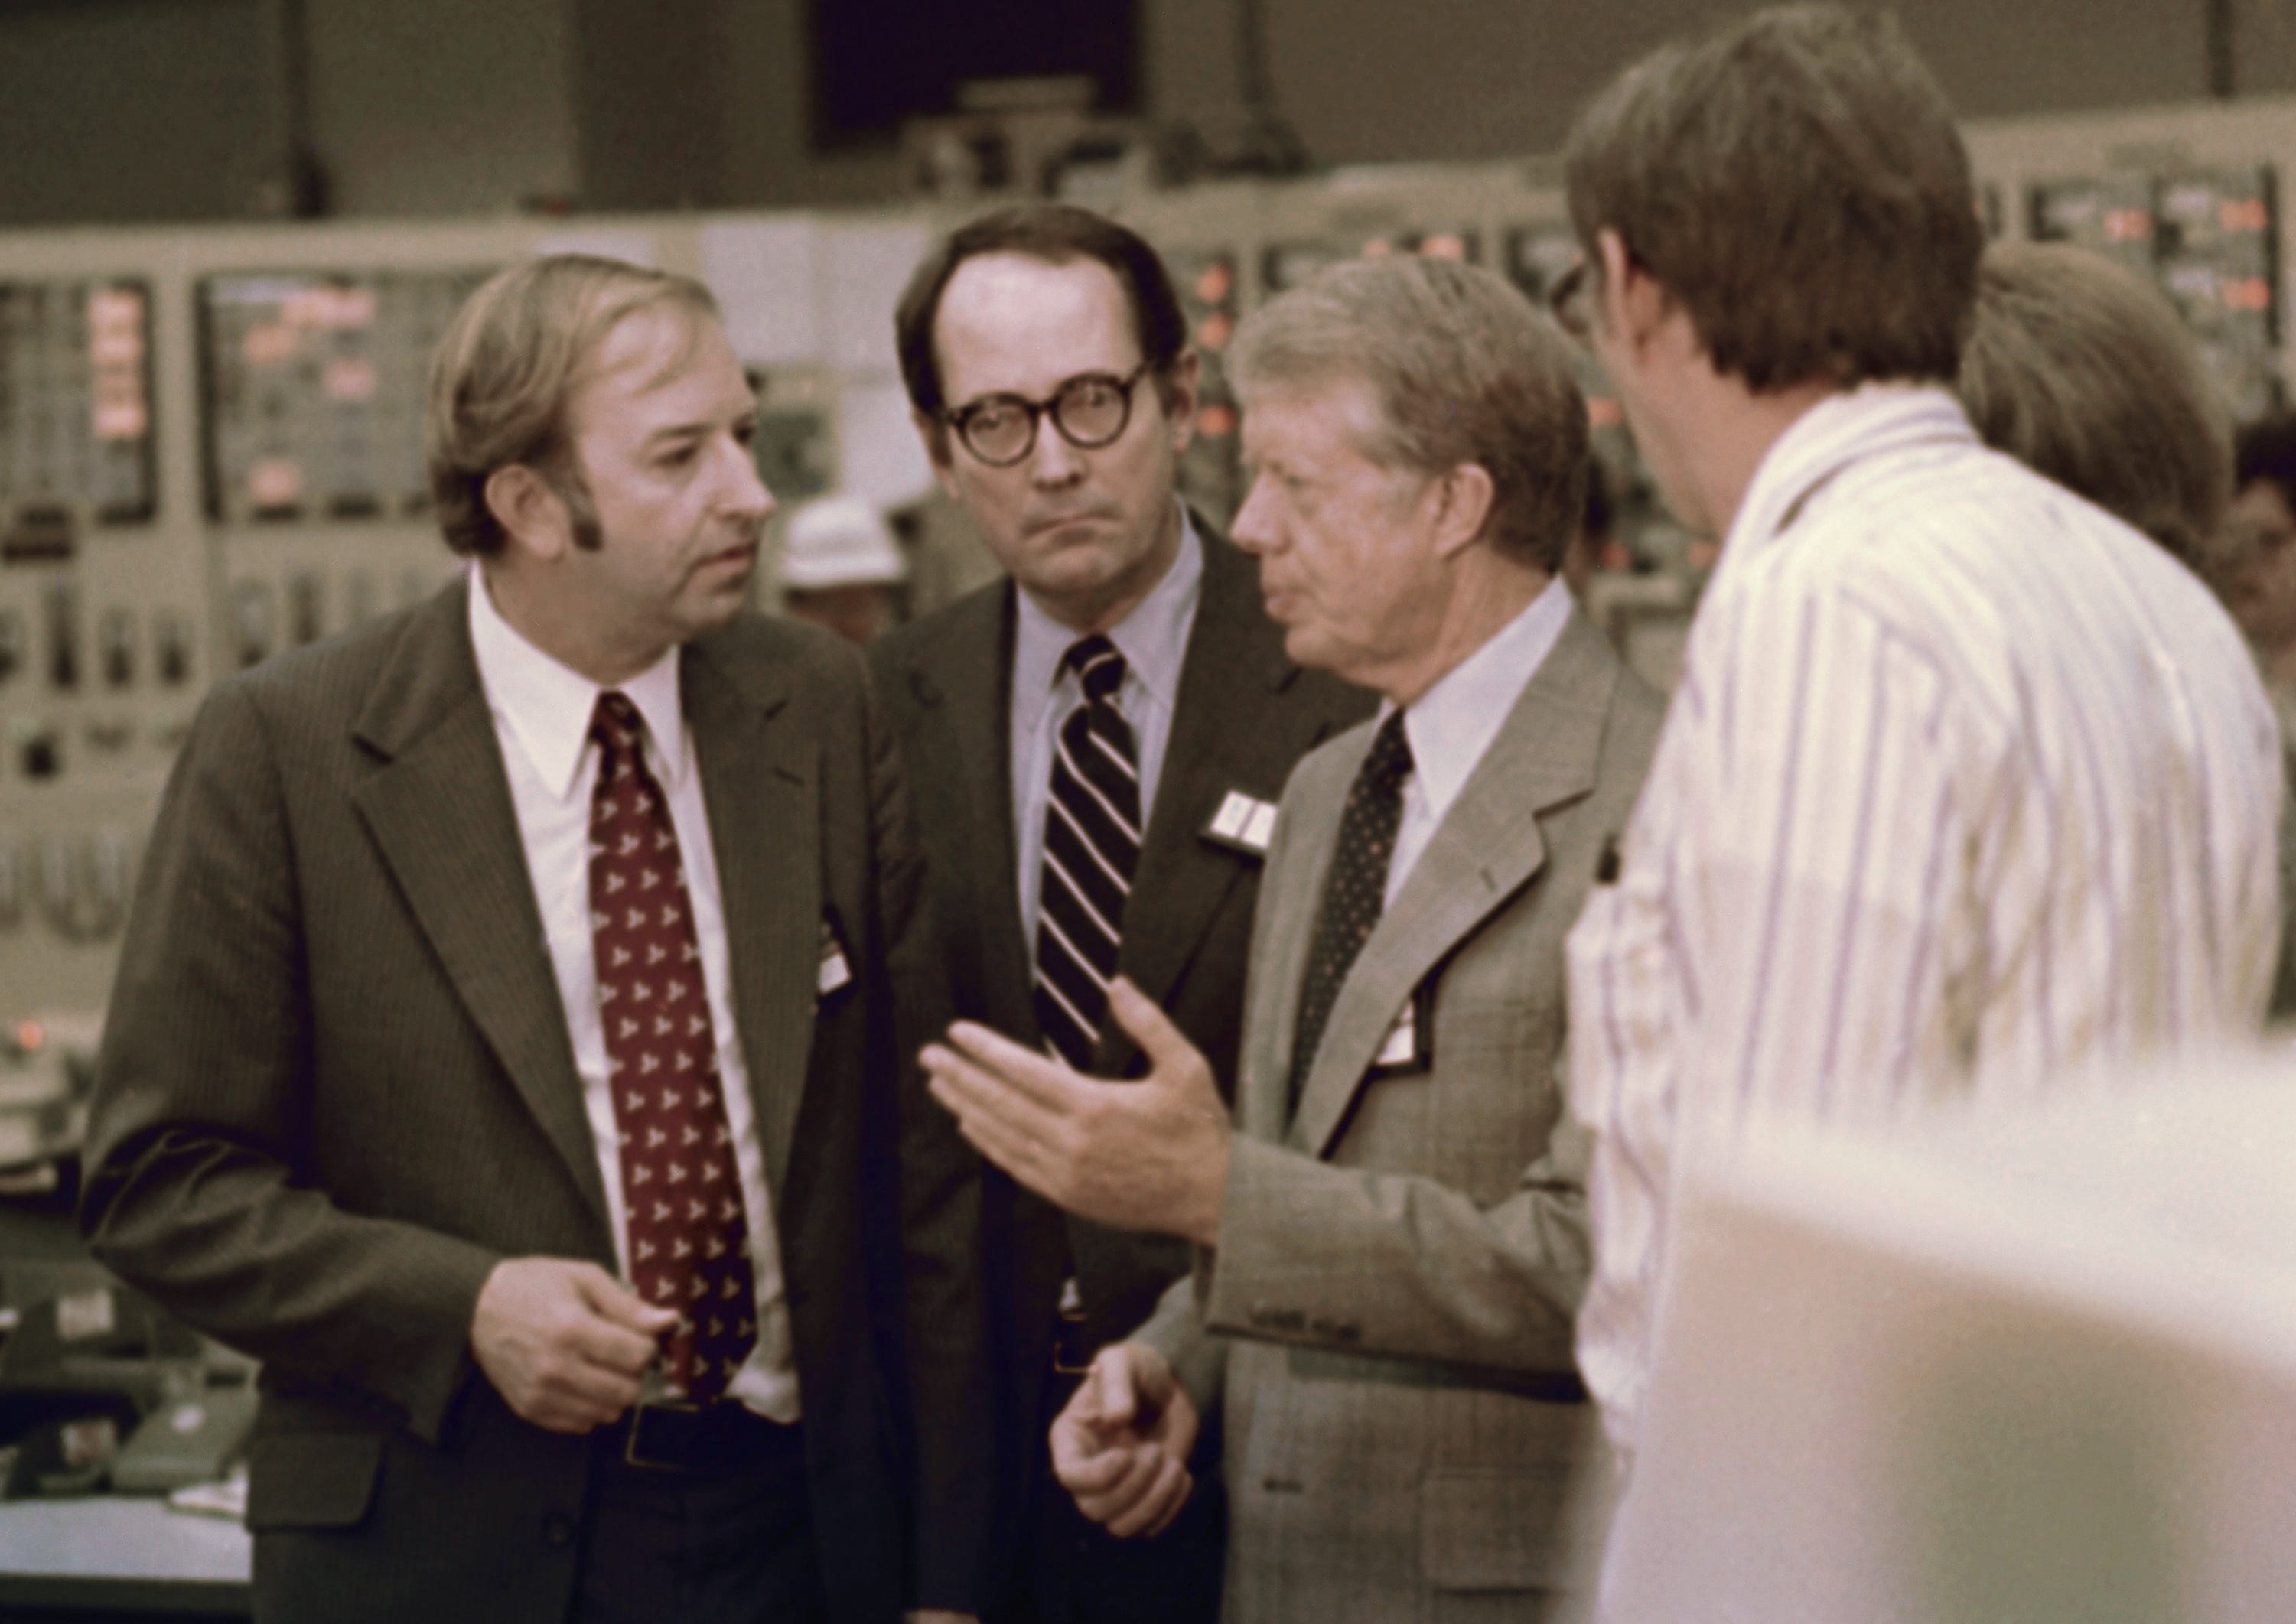 U.S. President Jimmy Carter shown  April 1, 1979 in control room of nuclear plant, of the Three Mile Island nuclear plant in Middletown, Pa. Standing with Carter from left: Harold Denton, Director of the U.S. Nuclear Agency; PA. Gov. Dick Thornburgh; an unidentified control room employee. (AP Photo)